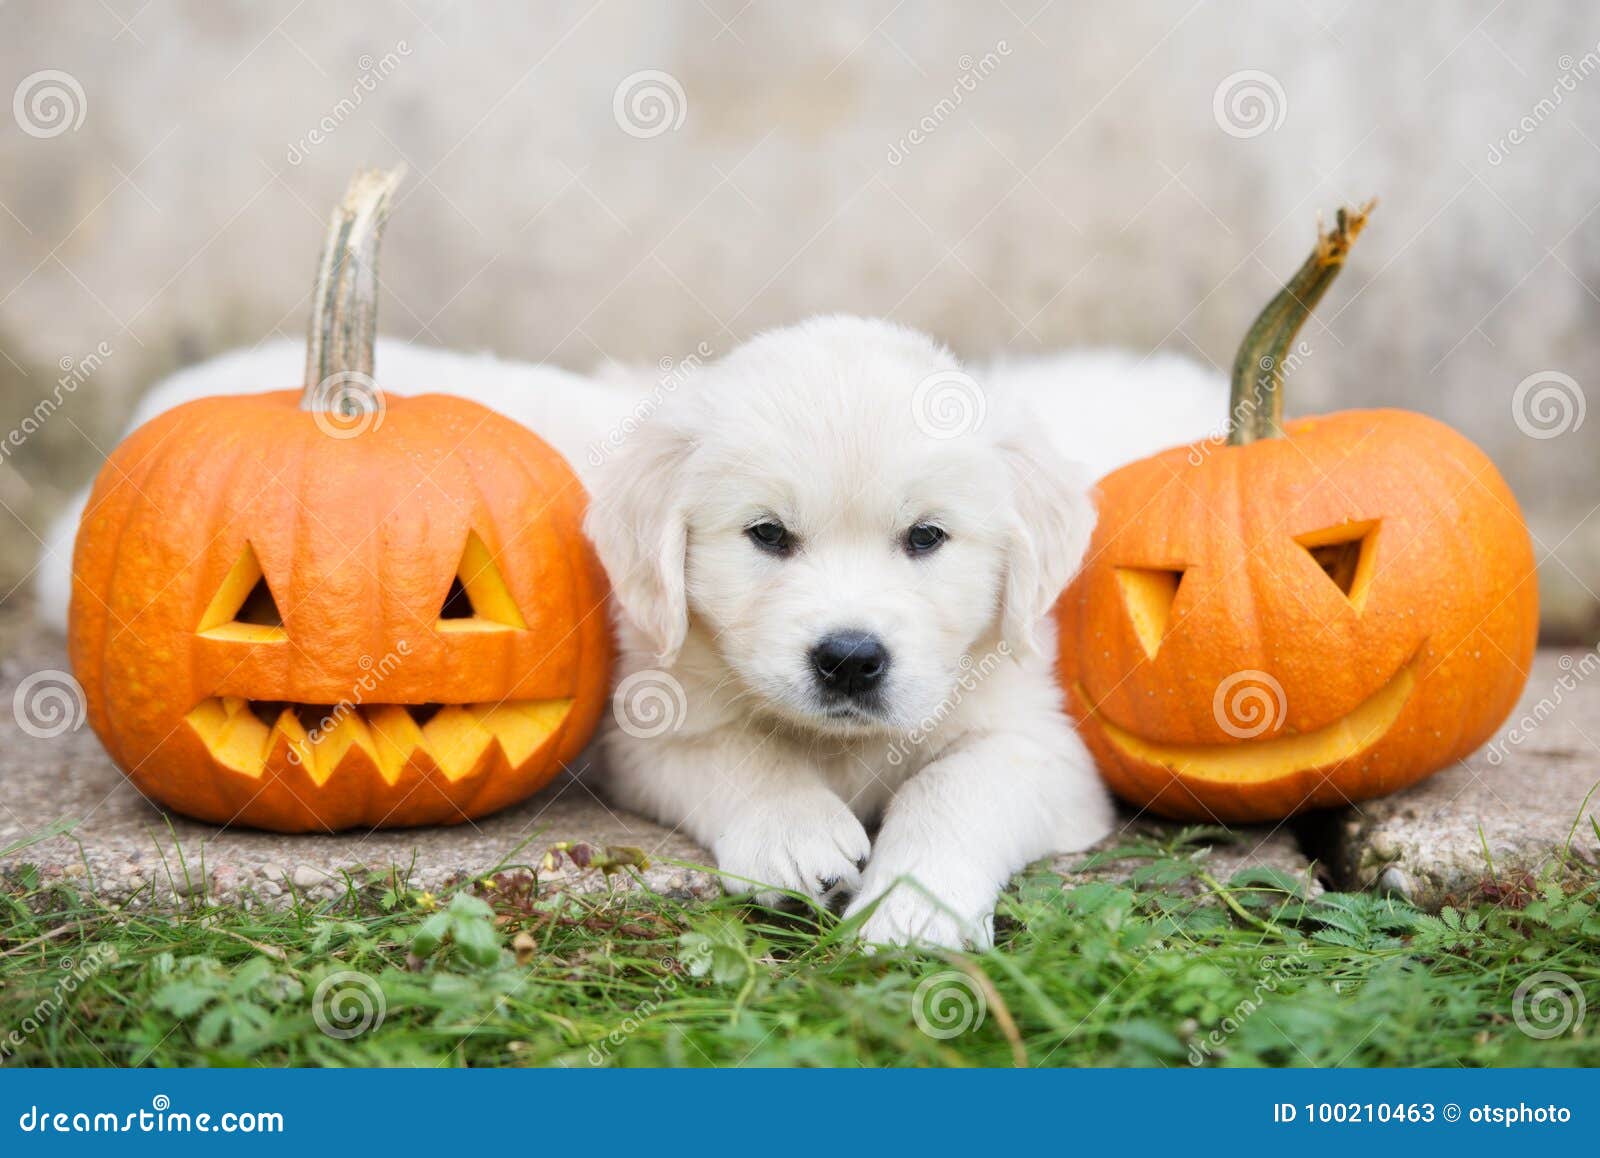 Golden Retriever Puppy With Carved Pumpkins Stock Image Image Of Autumn Orange 100210463